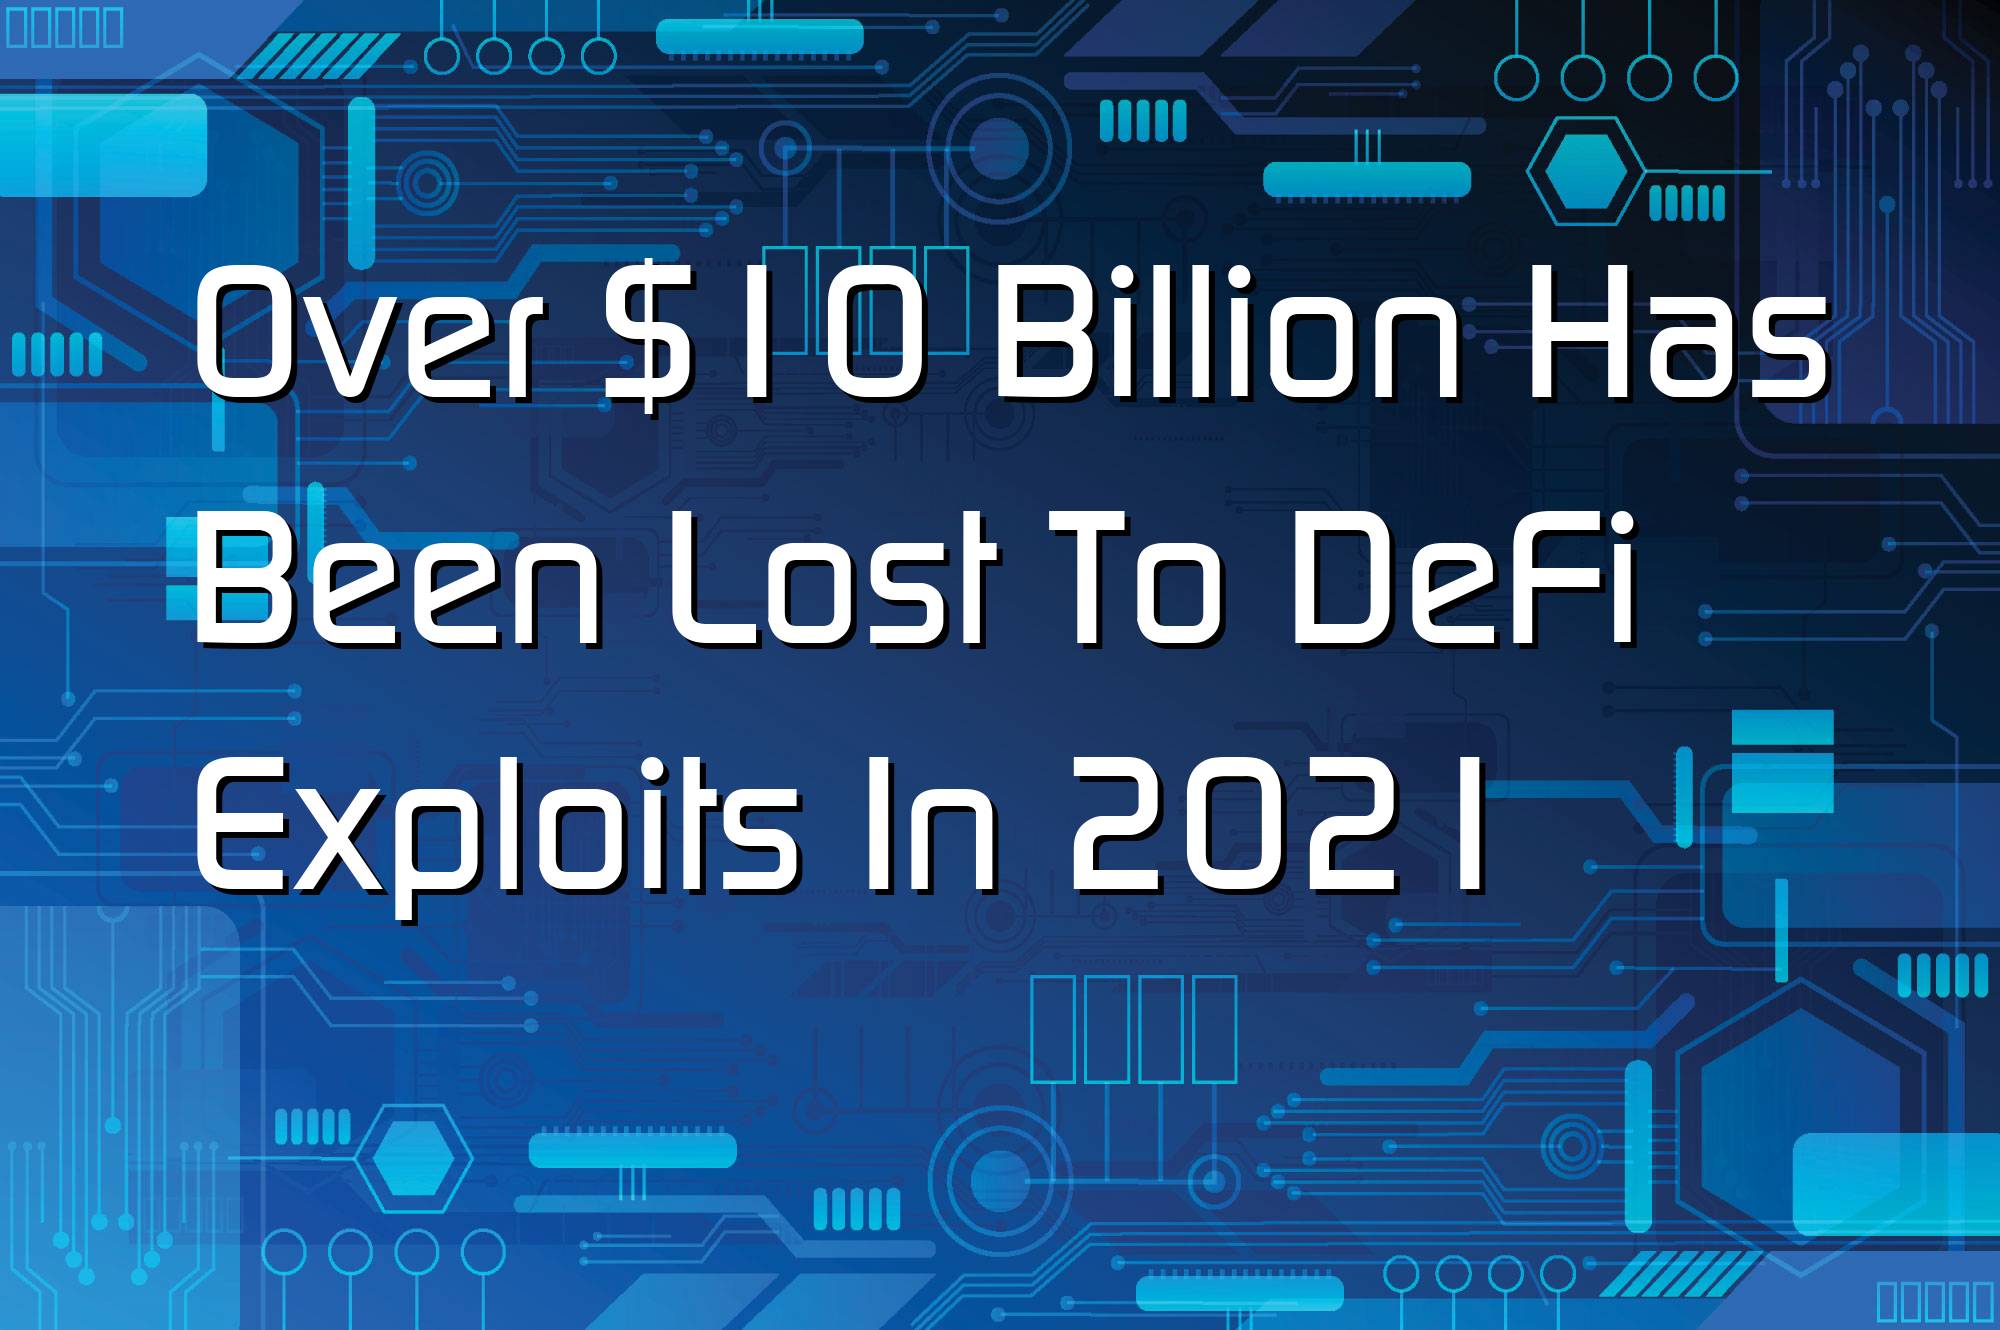 @$59654: Over $10 Billion Has Been Lost To DeFi Exploits In 2021